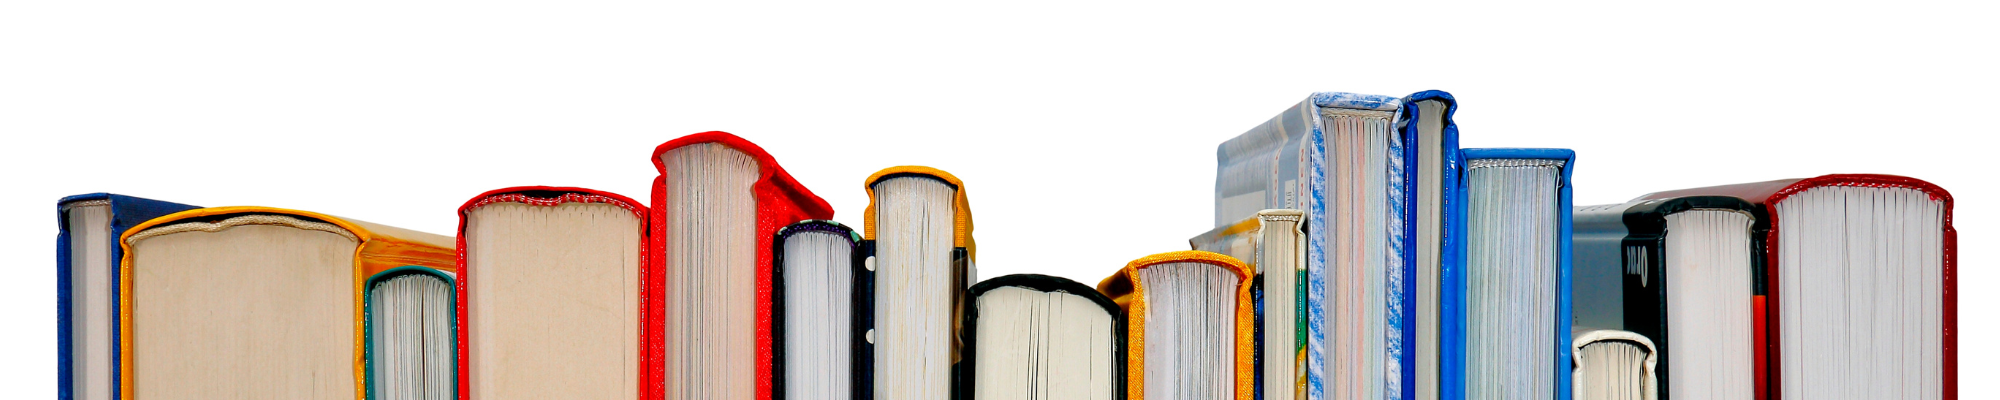 Horizontal Stack of Colorful Books